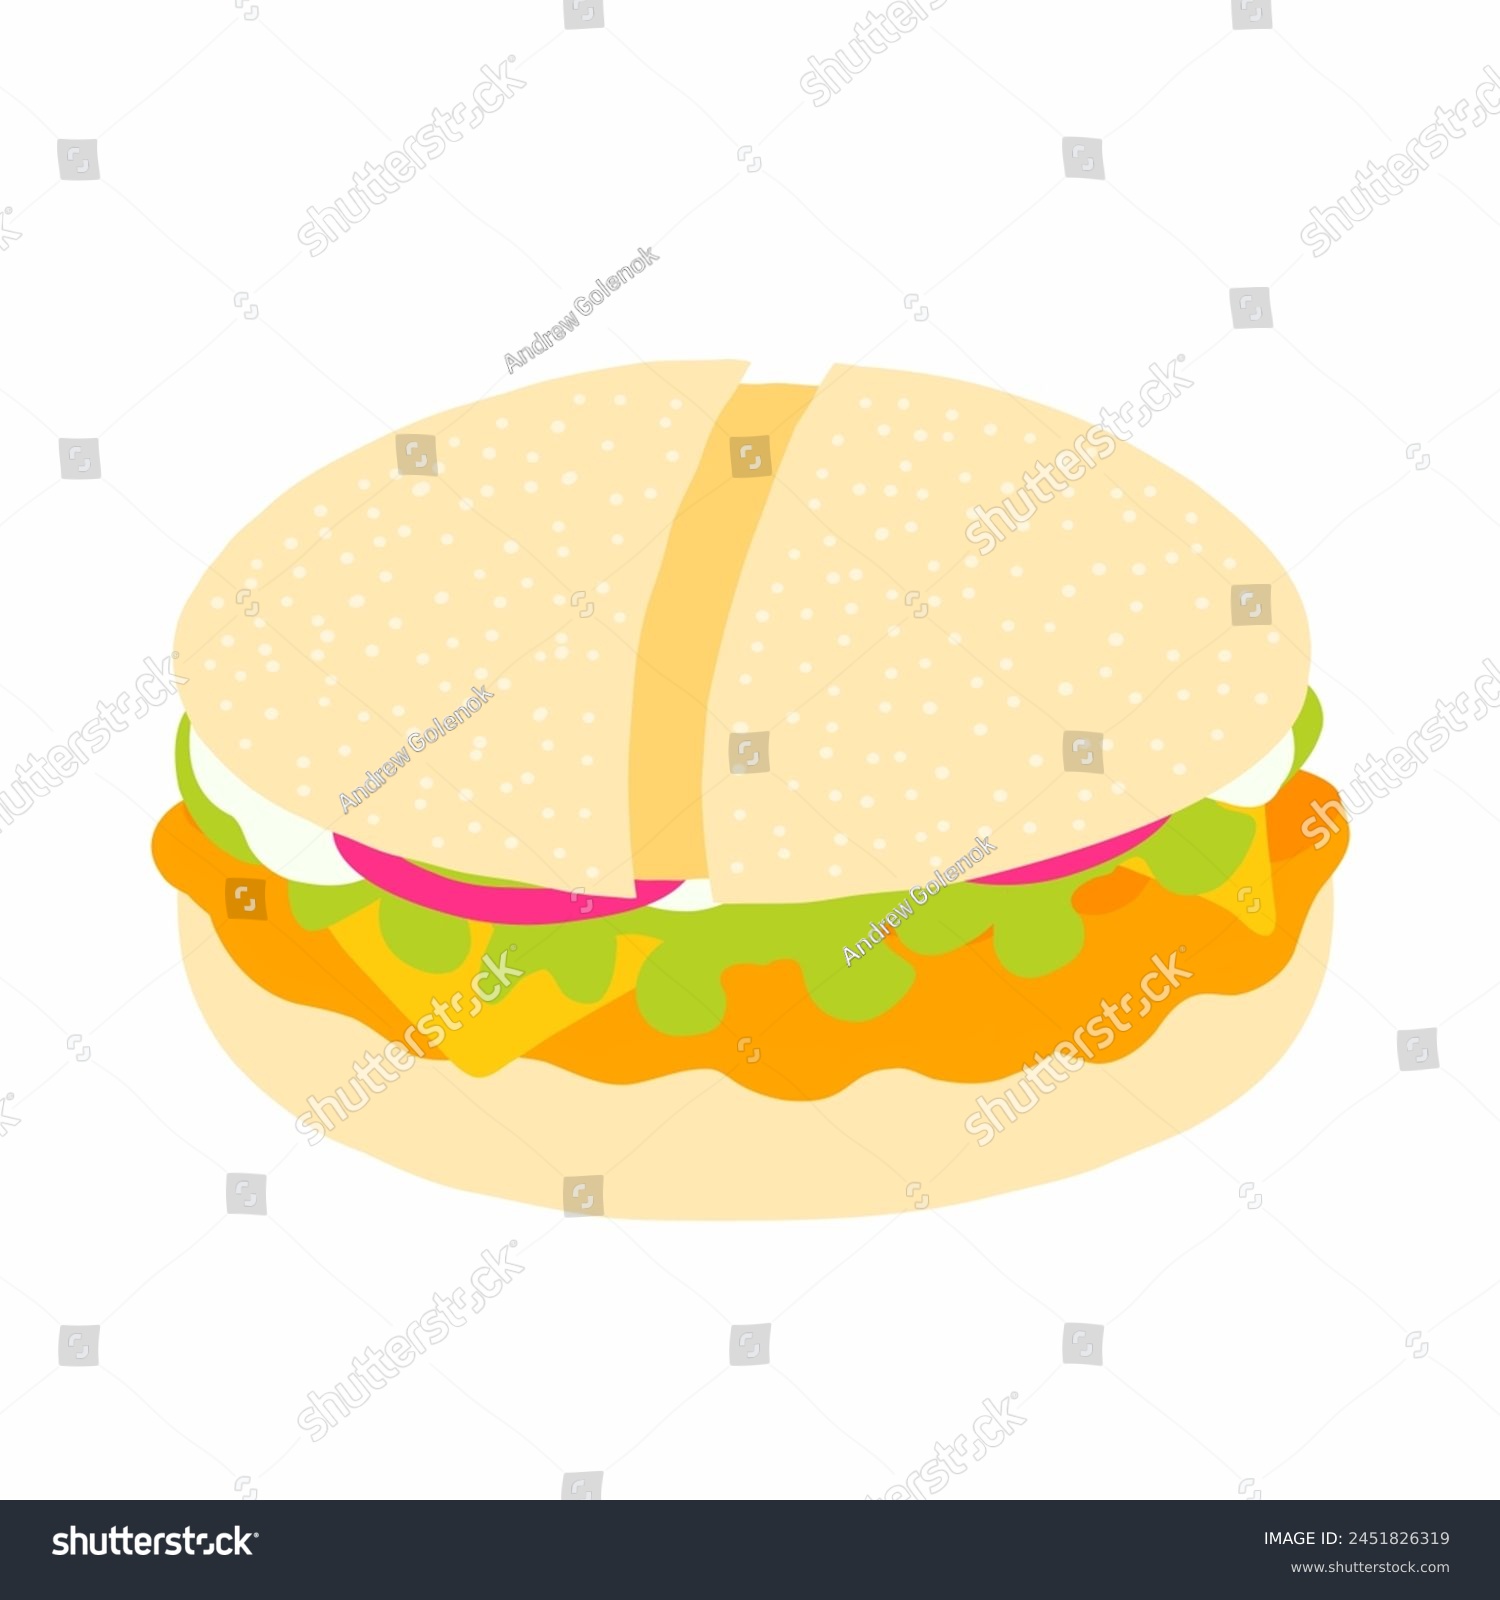 SVG of Burger with wheat panini bun, chicken cutlet, cheese, salad, onion and sauce icon in cartoon flat style. Vector illustration isolated on white background. For menu, poster, infographic, restaurant. svg